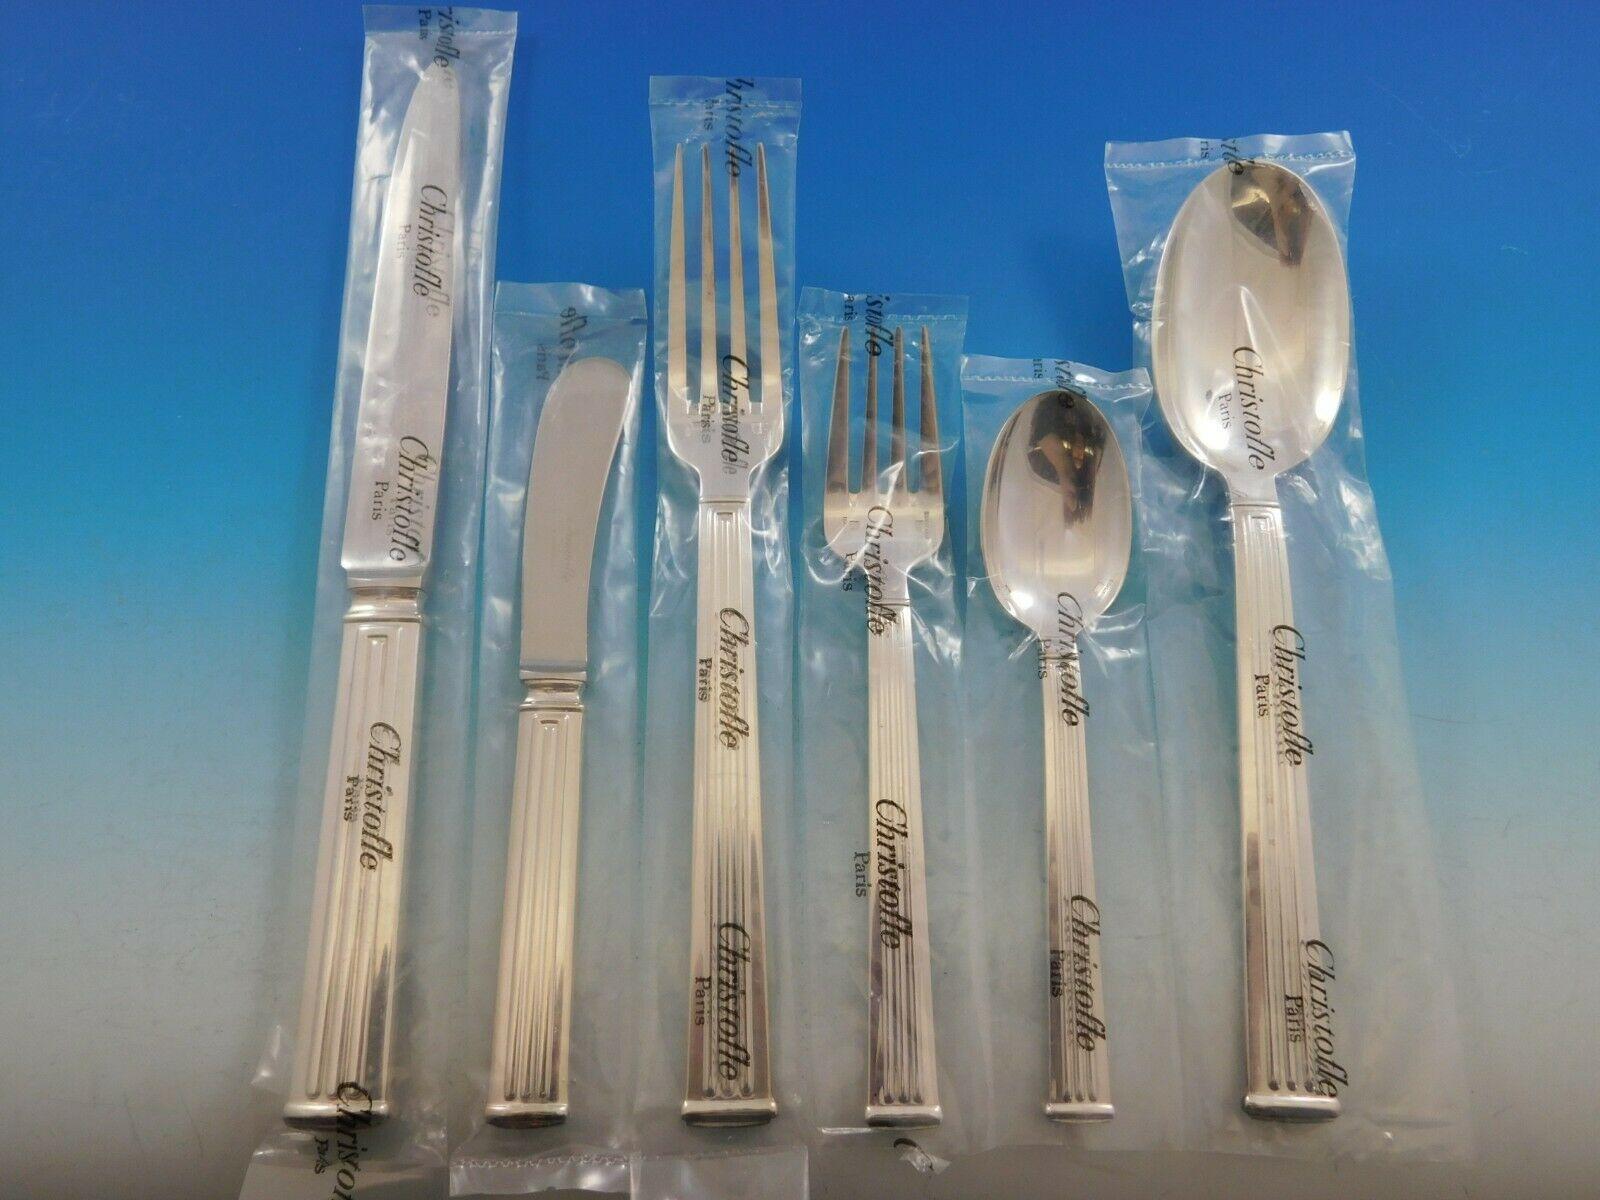 Dinner size triade by Christofle France silver plated Flatware set - 48 pieces. This set includes:

8 dinner knives, 9 3/4